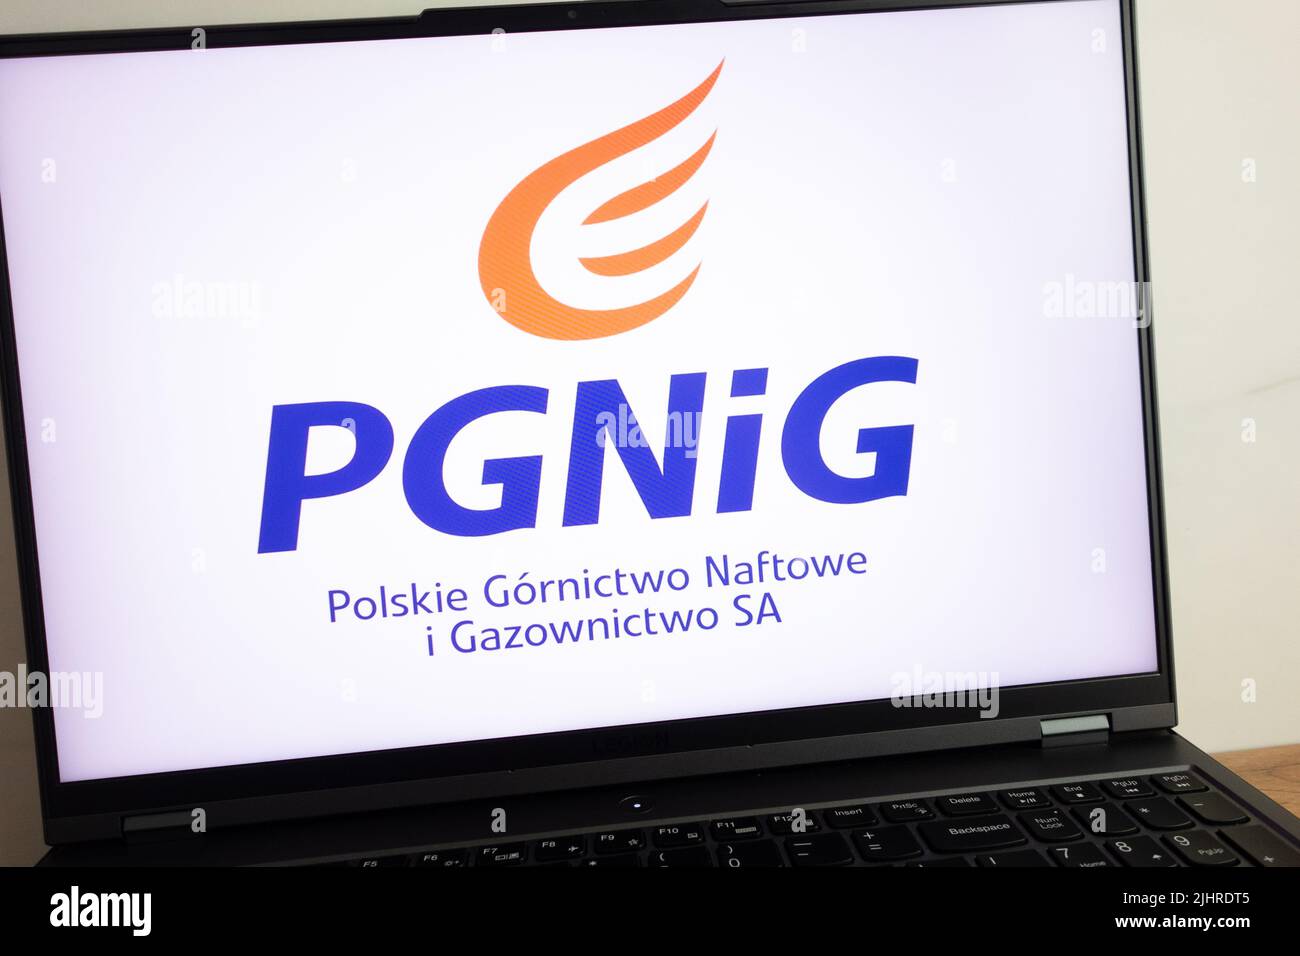 KONSKIE, POLAND - July 19, 2022: PGNIG Polish Oil Mining and Gas Extraction SA company logo displayed on laptop computer screen Stock Photo